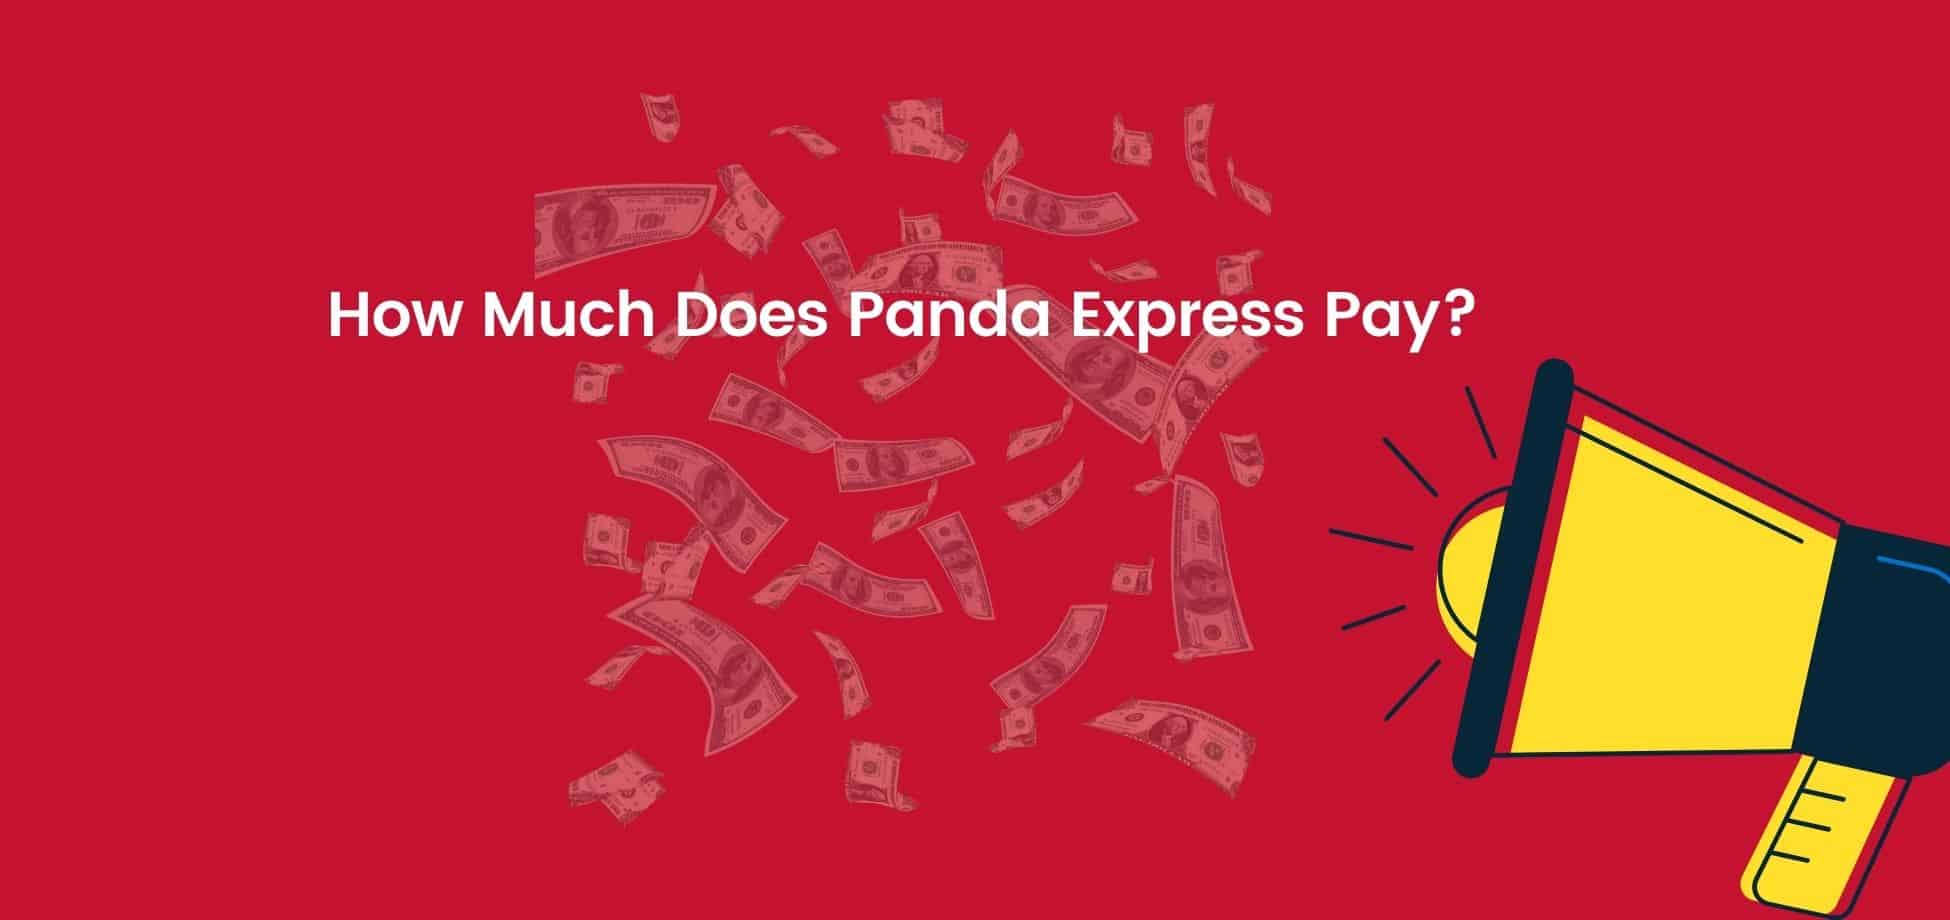 Panda Express salaries are competitive and the excellent benefits make a job here very attractive.